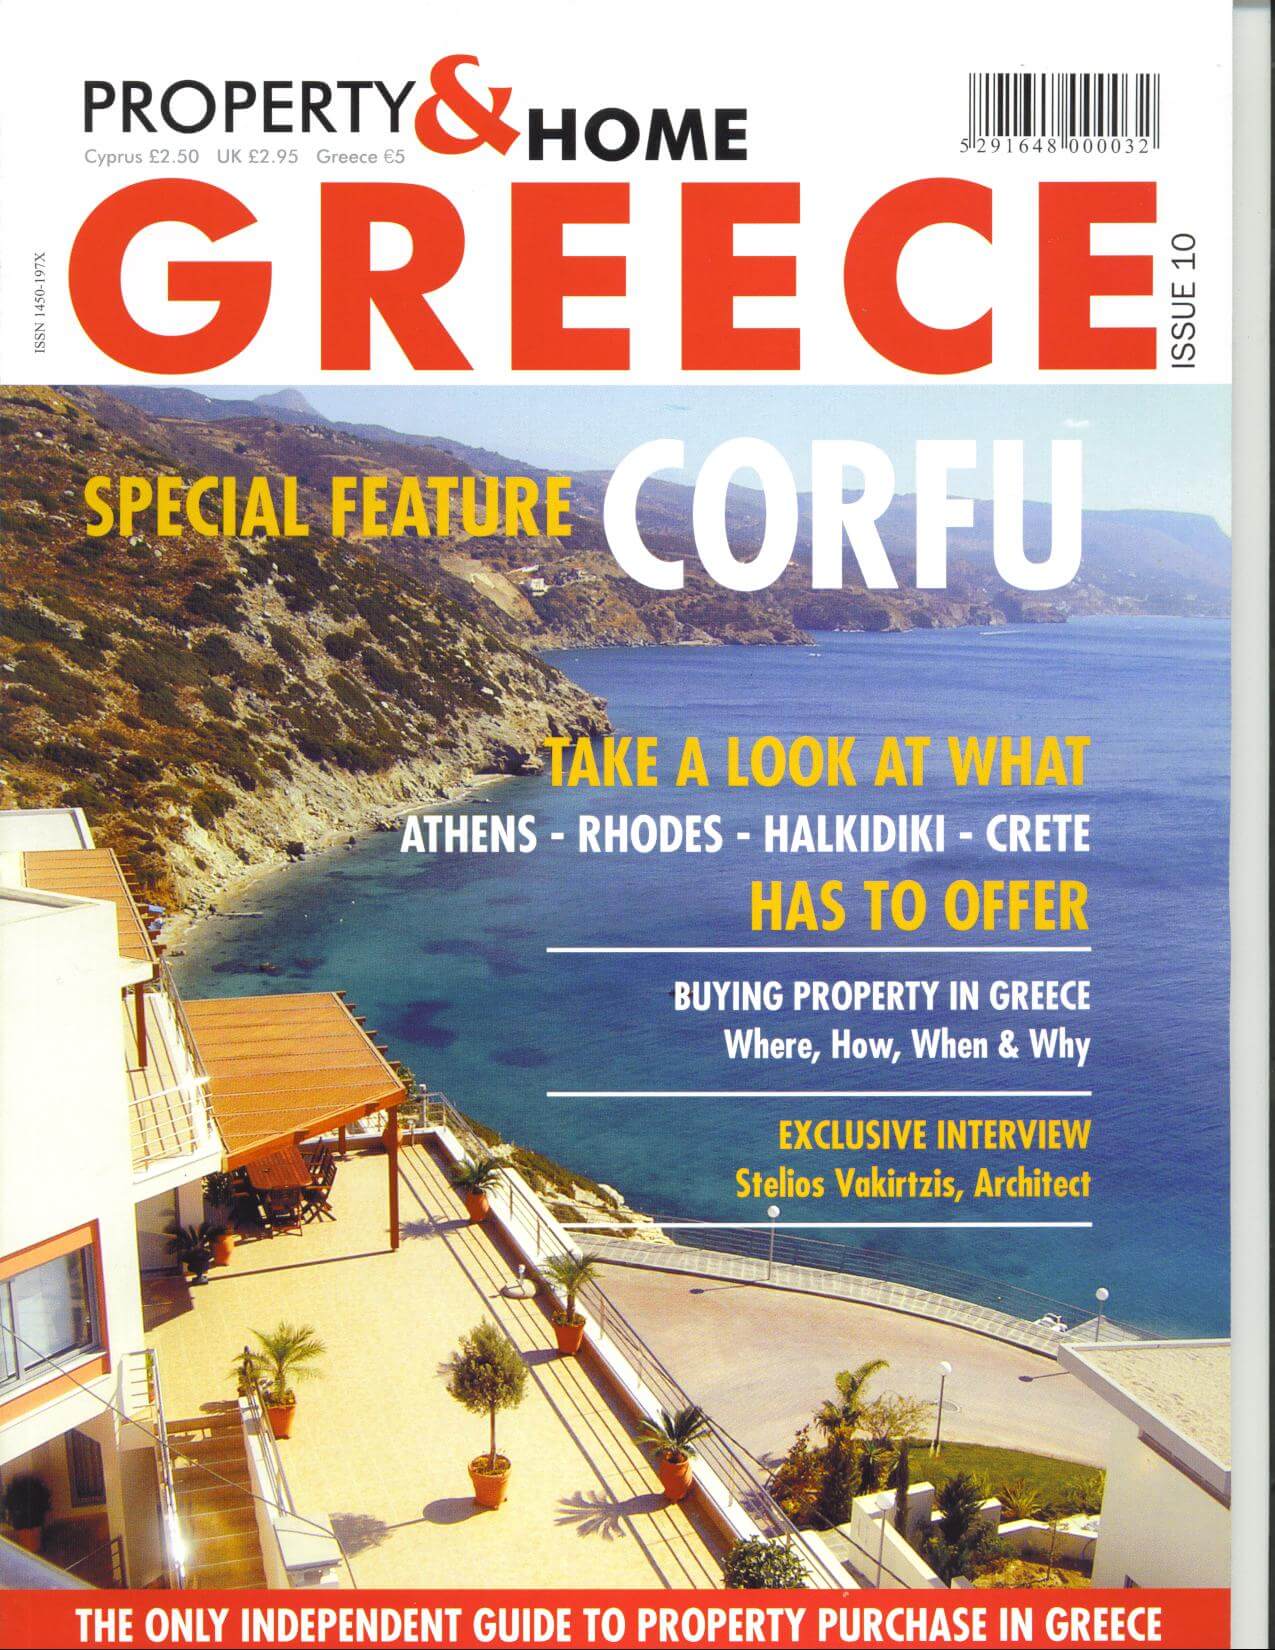 2005_ROU ESTATE_property&home greece_issue 10 dec 05_00 LOW RES